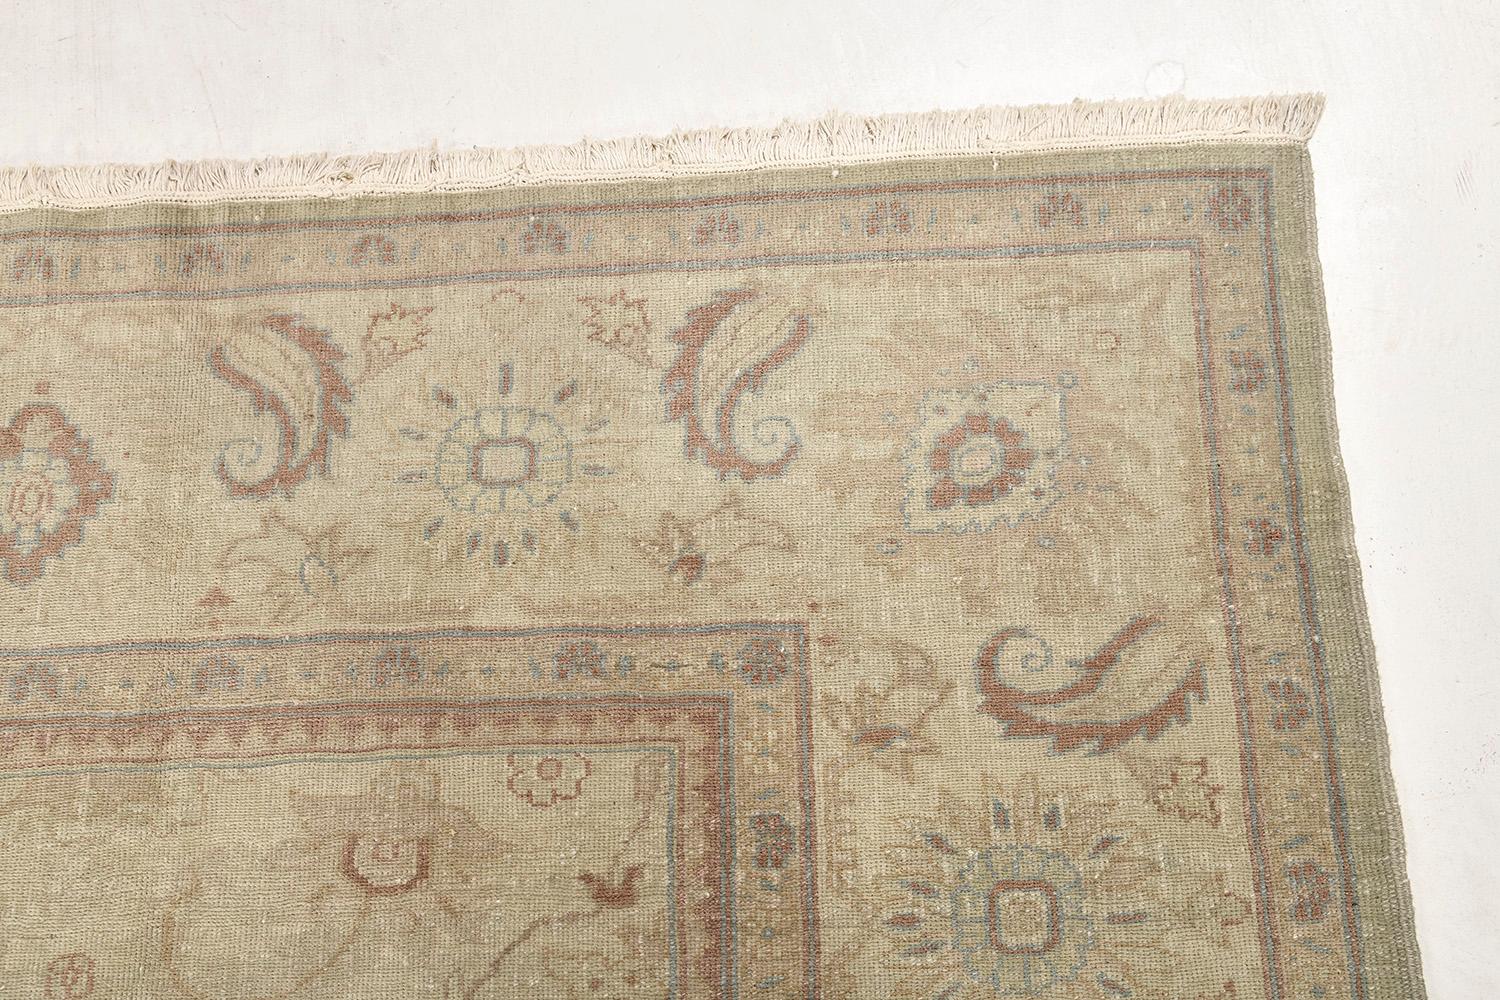 Egyptian Antique Revival Rug 4